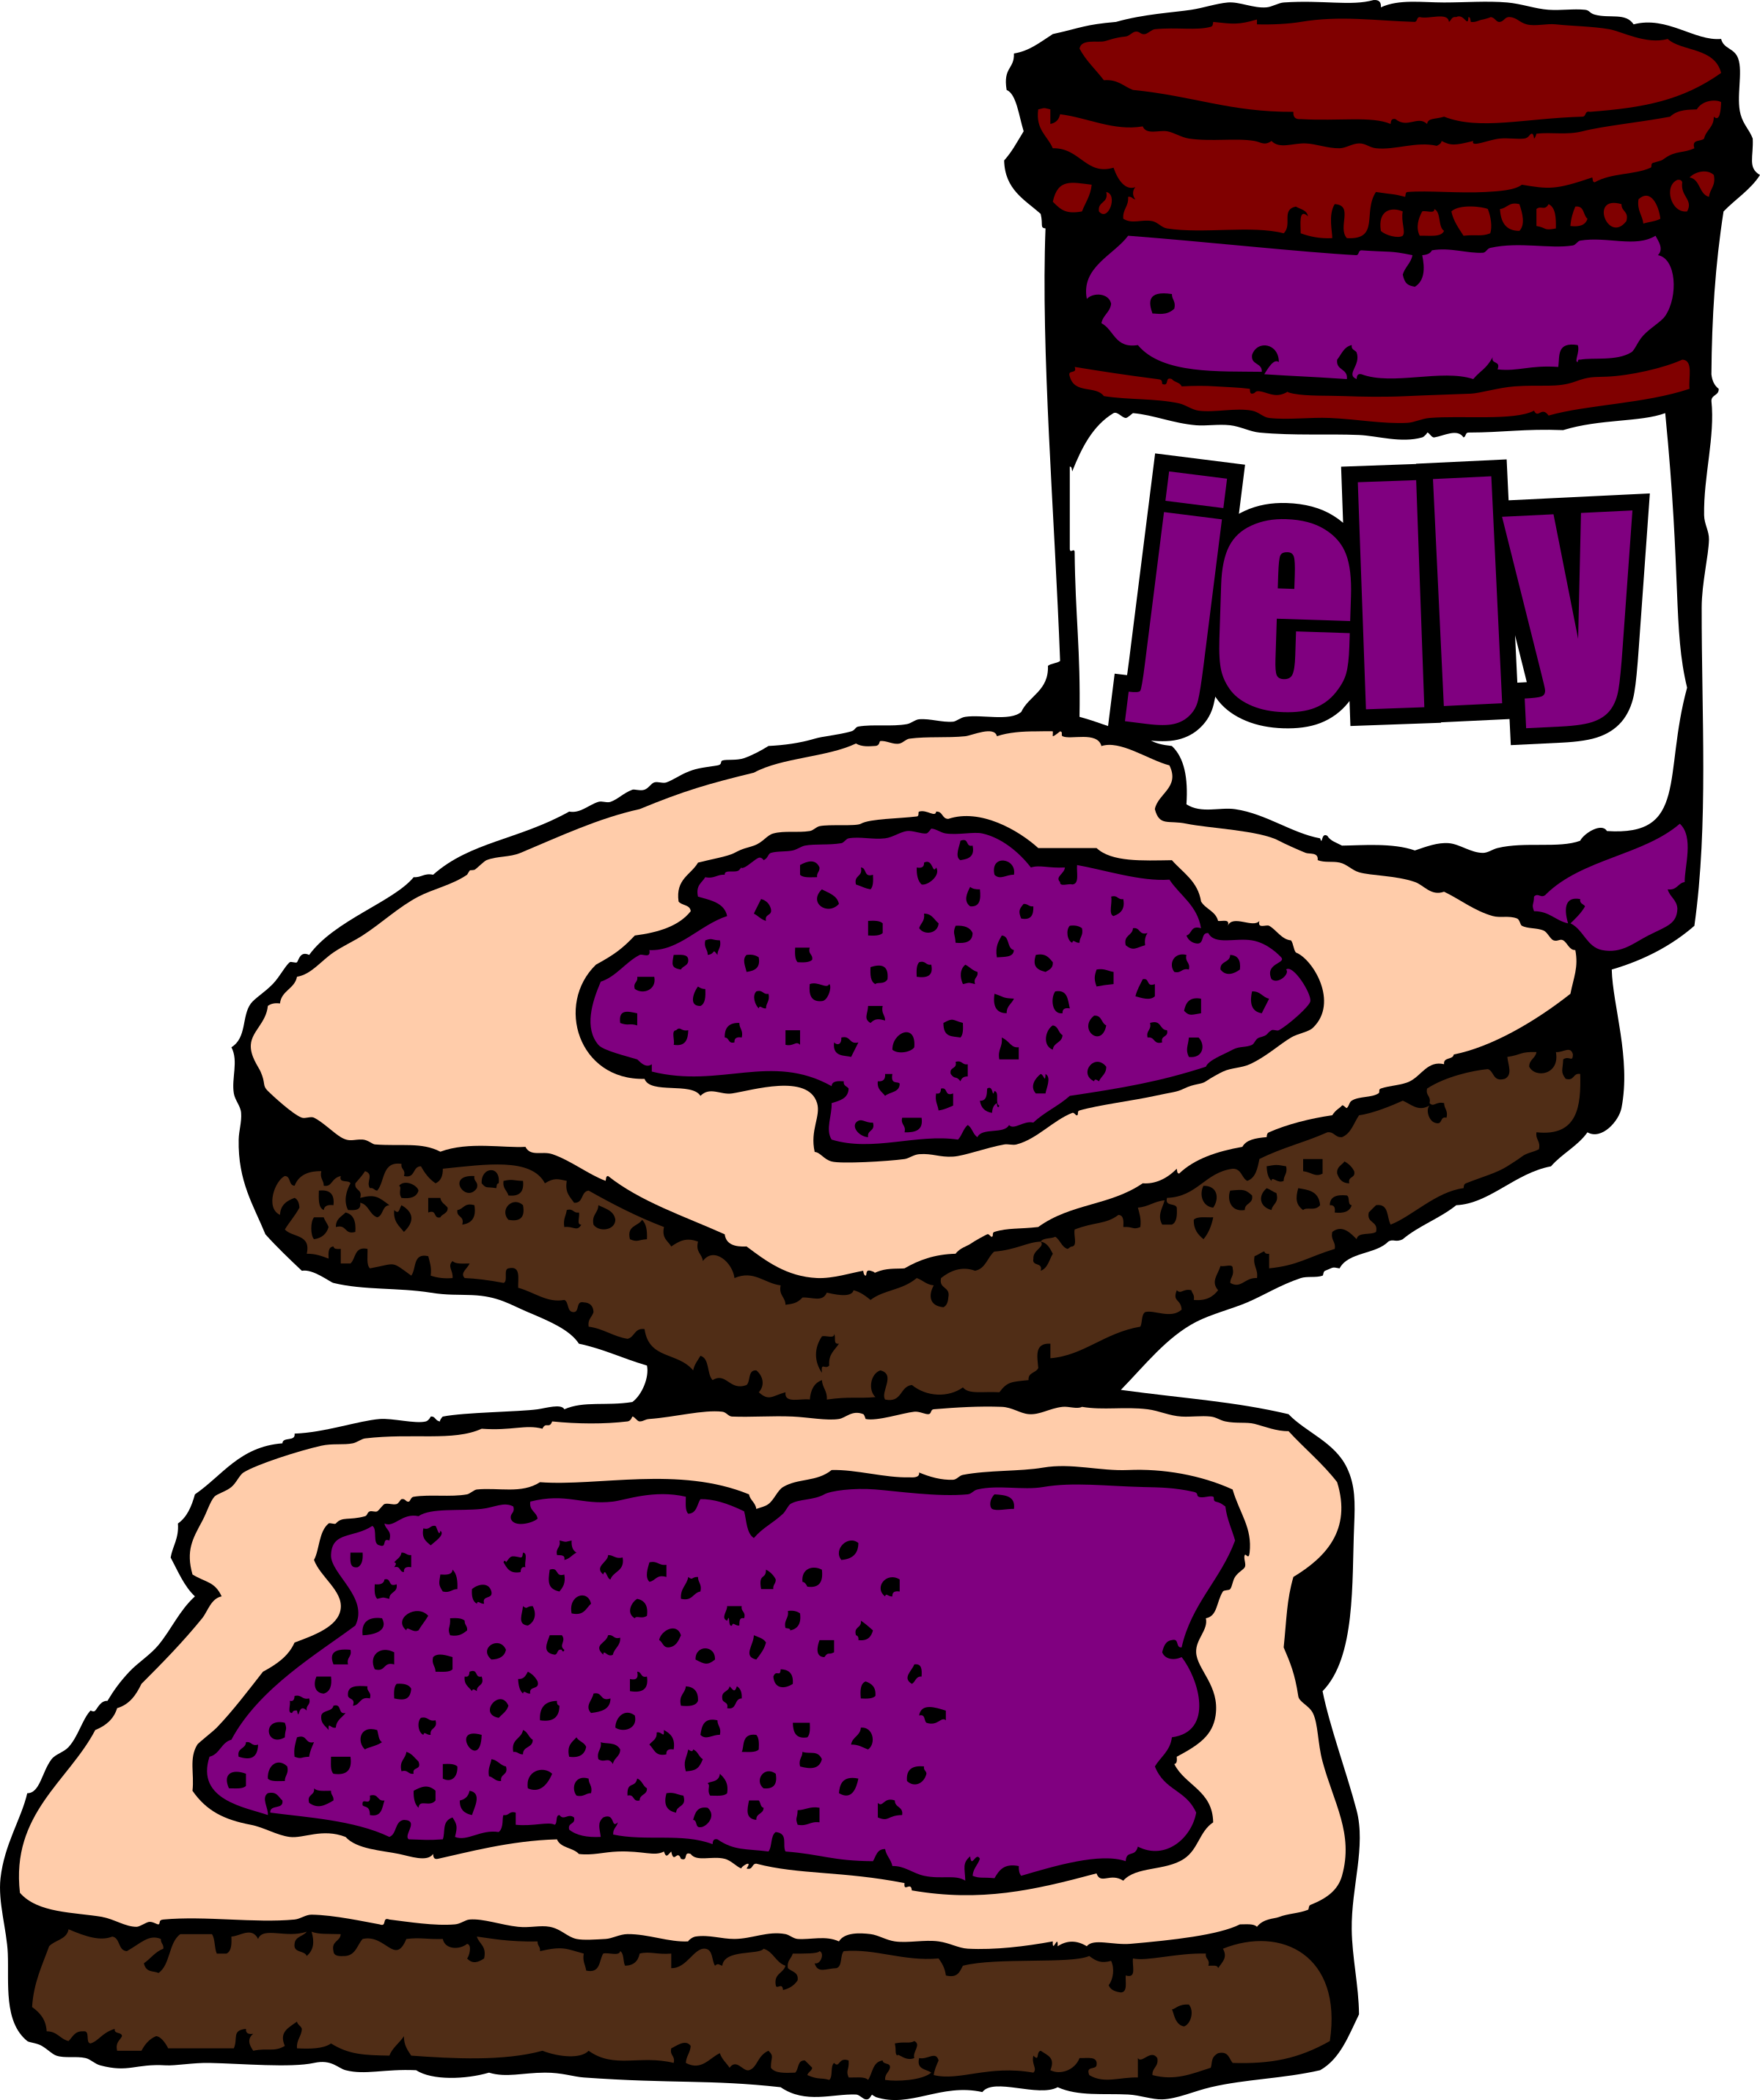 Free Bbq Graphic, Download Free Clip Art, Free Clip - Peanut Butter And Jelly Sandwich Clipart Black (2400x2864)